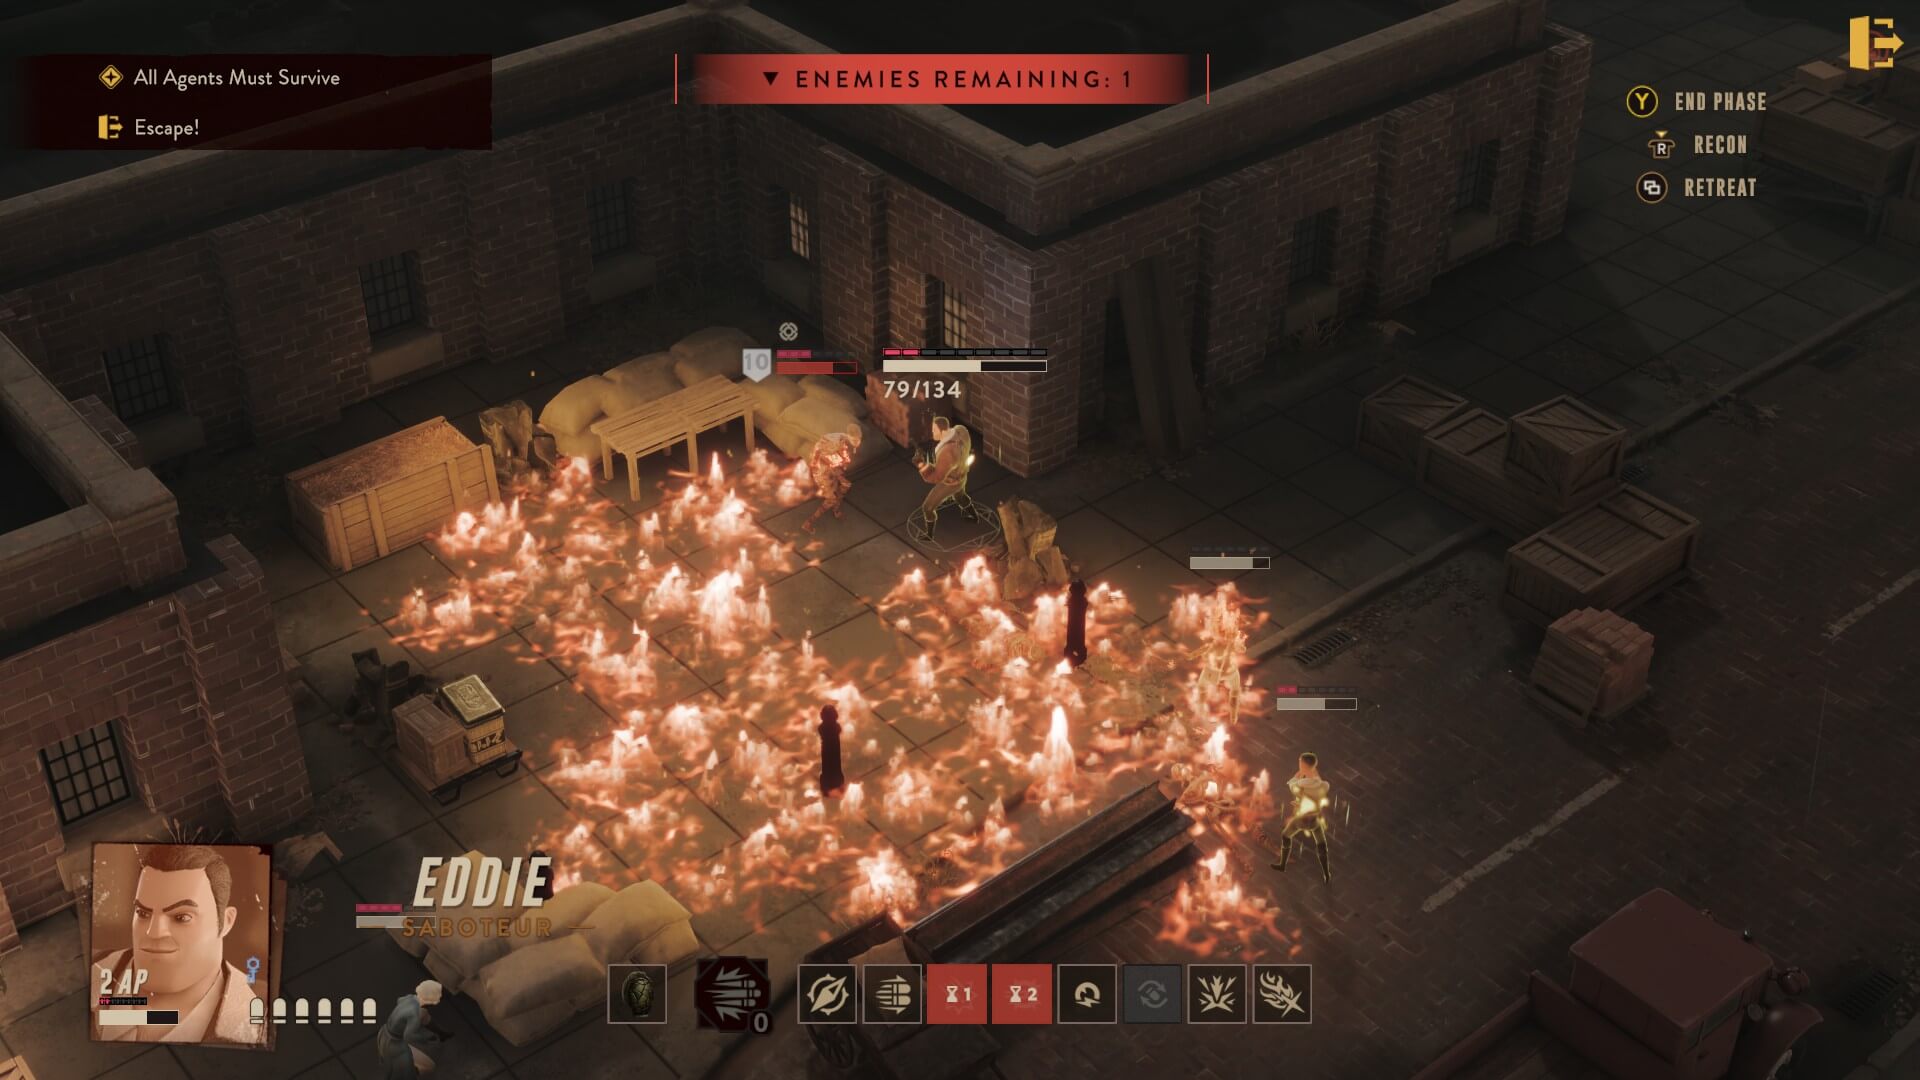 During one of my encounters against a group of mummies, one of my agents had gotten surrounded by flames.